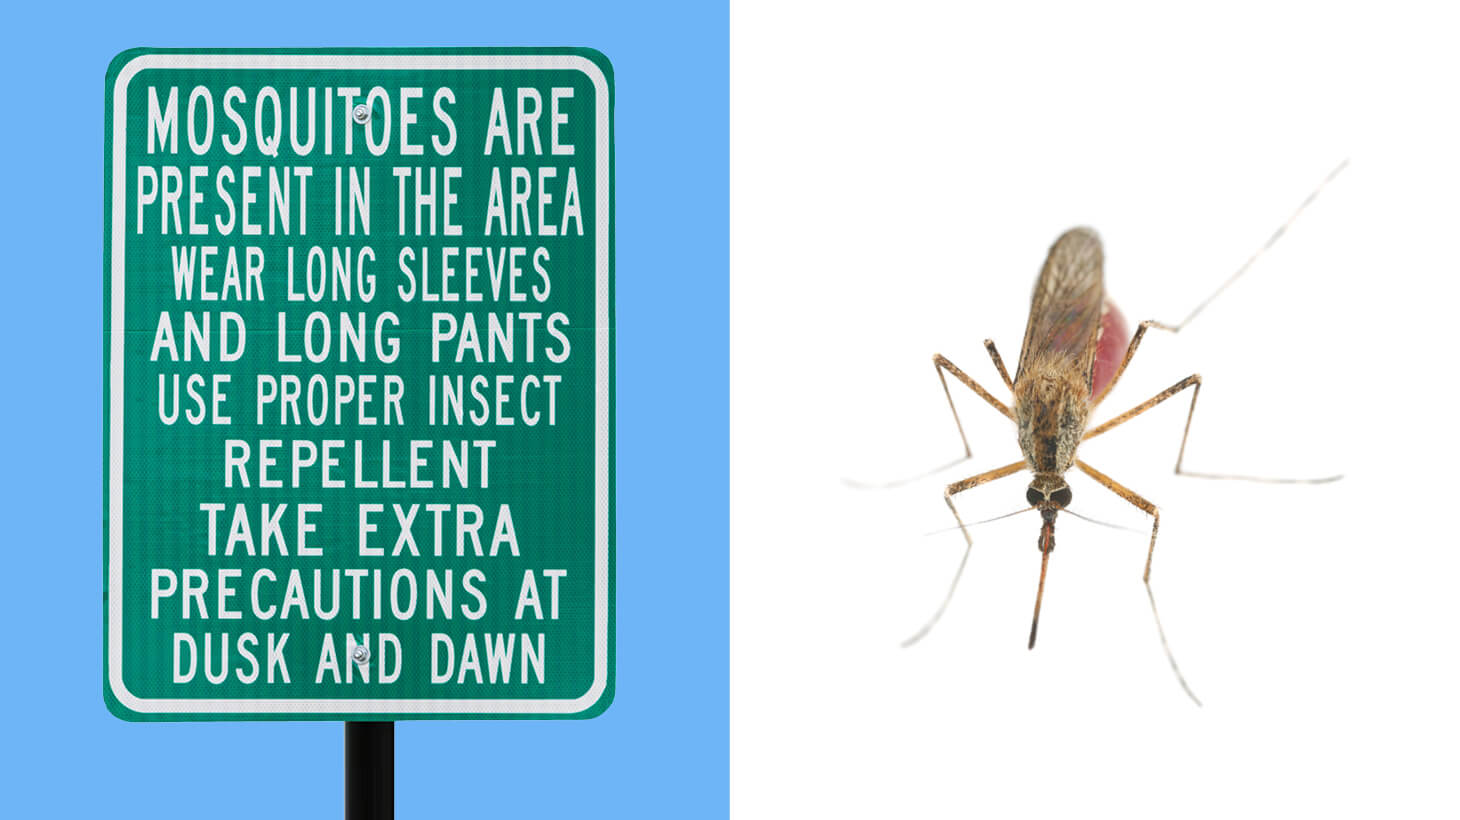 Mosquito warning sign and mosquito